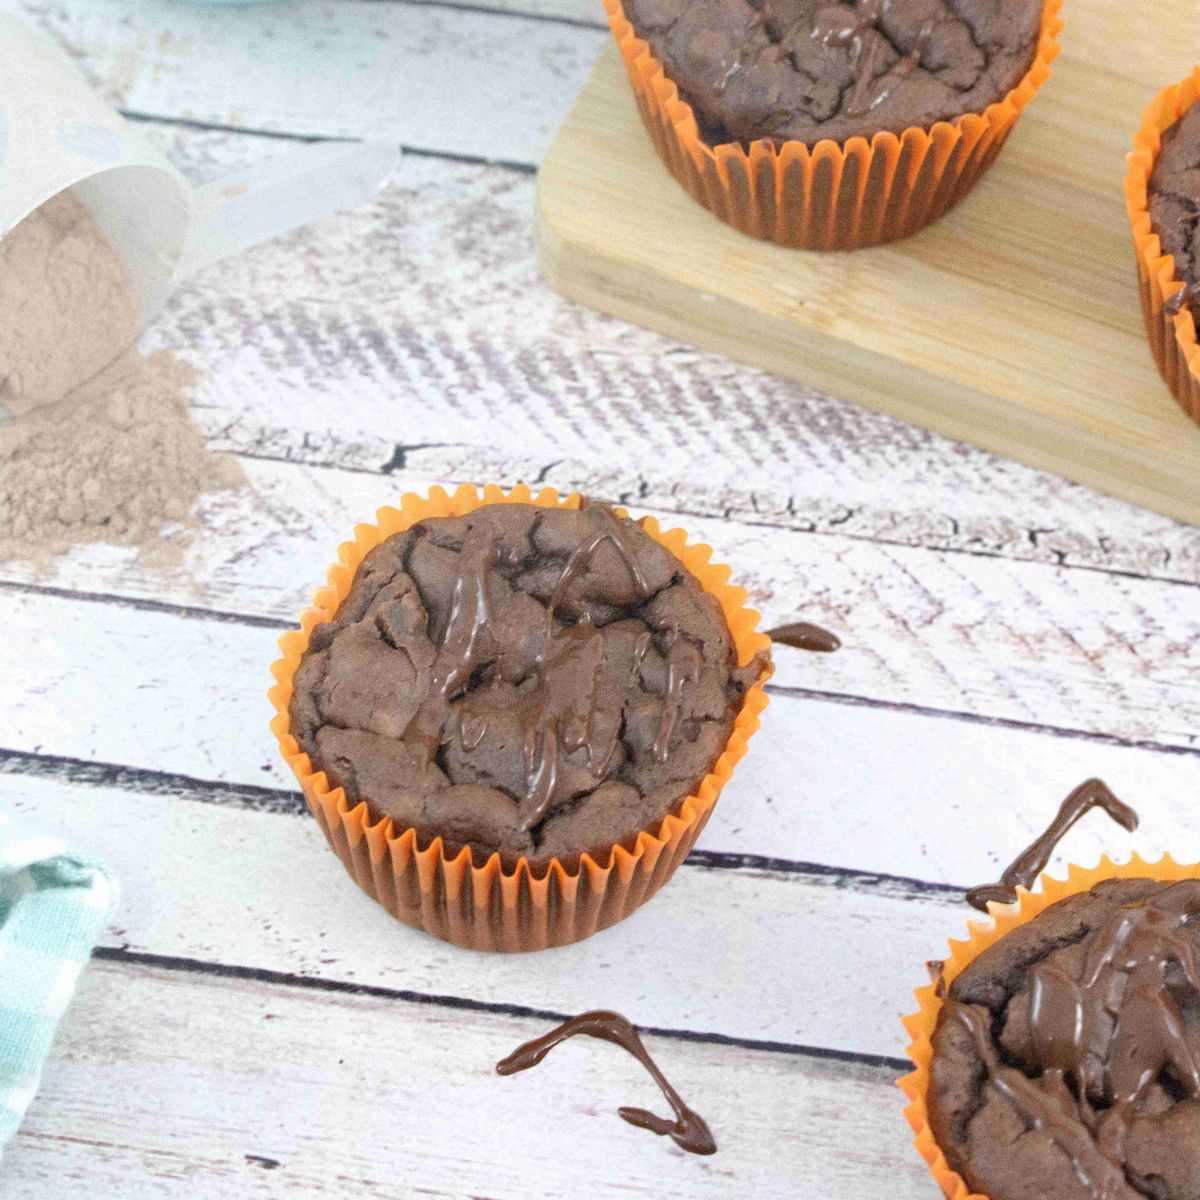 Chocolate muffins in orange liners with some on a wooden cutting board and chocolate sauce drizzled around them with a blue pot of sauce, scoop of protein powder, and a blue linen behind them.